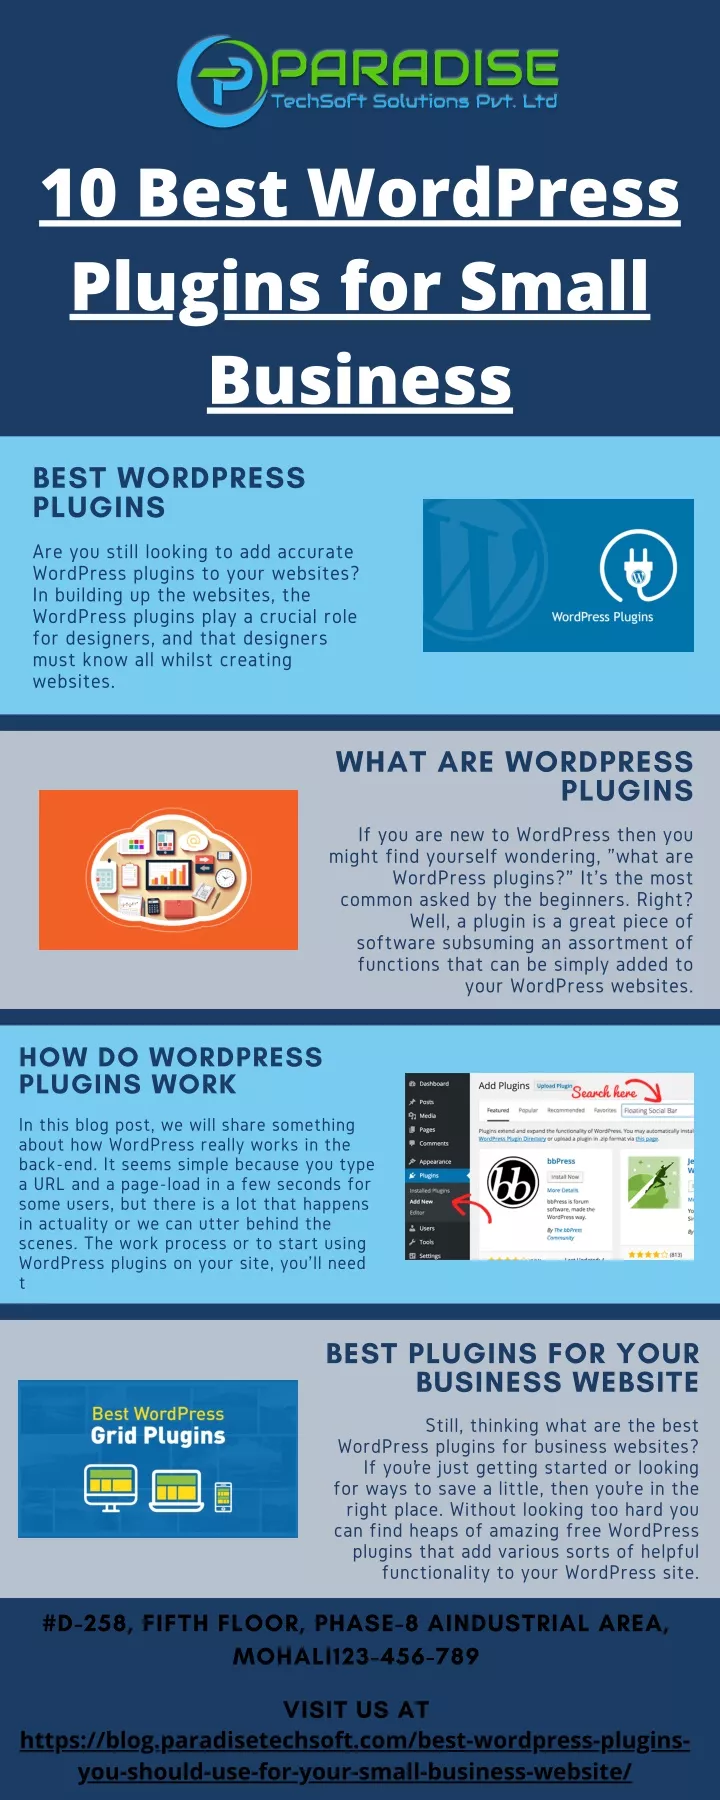 10 best wordpress plugins for small business